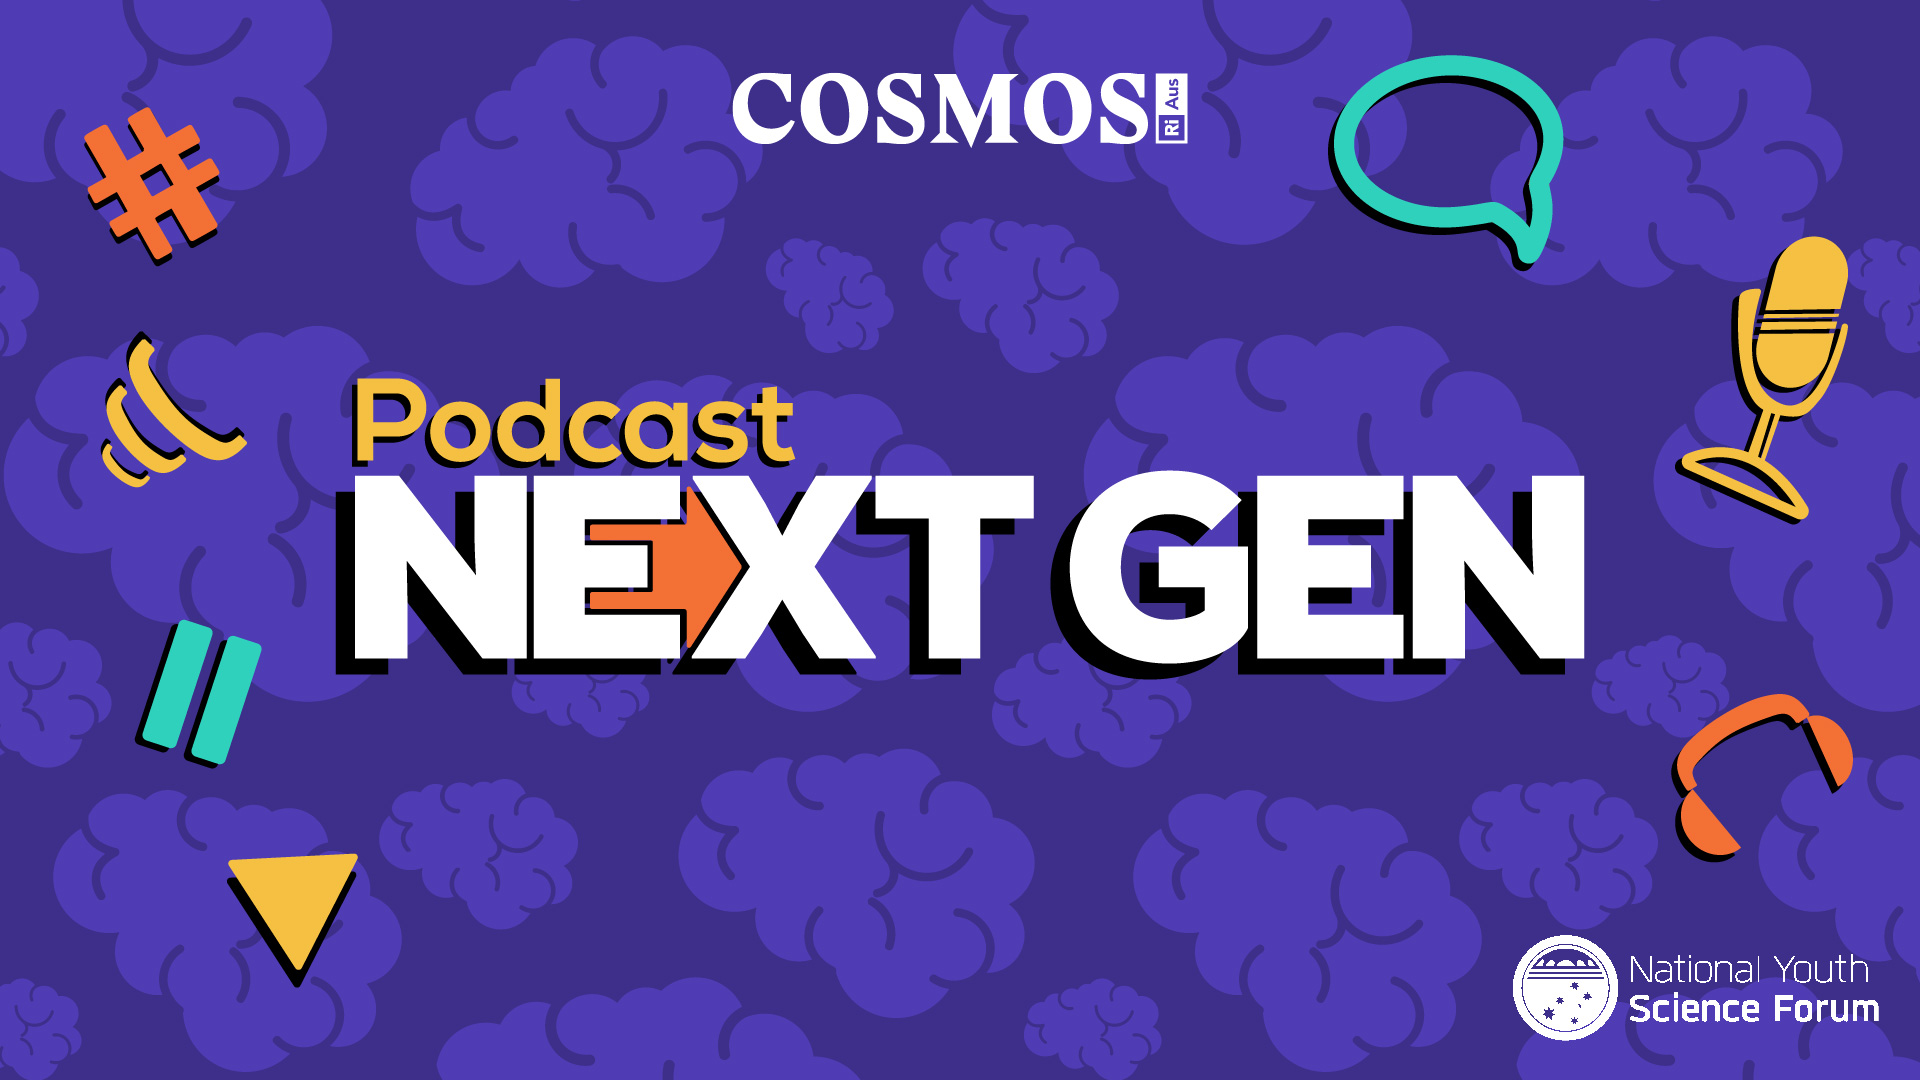 Podcast Next Gen Collection